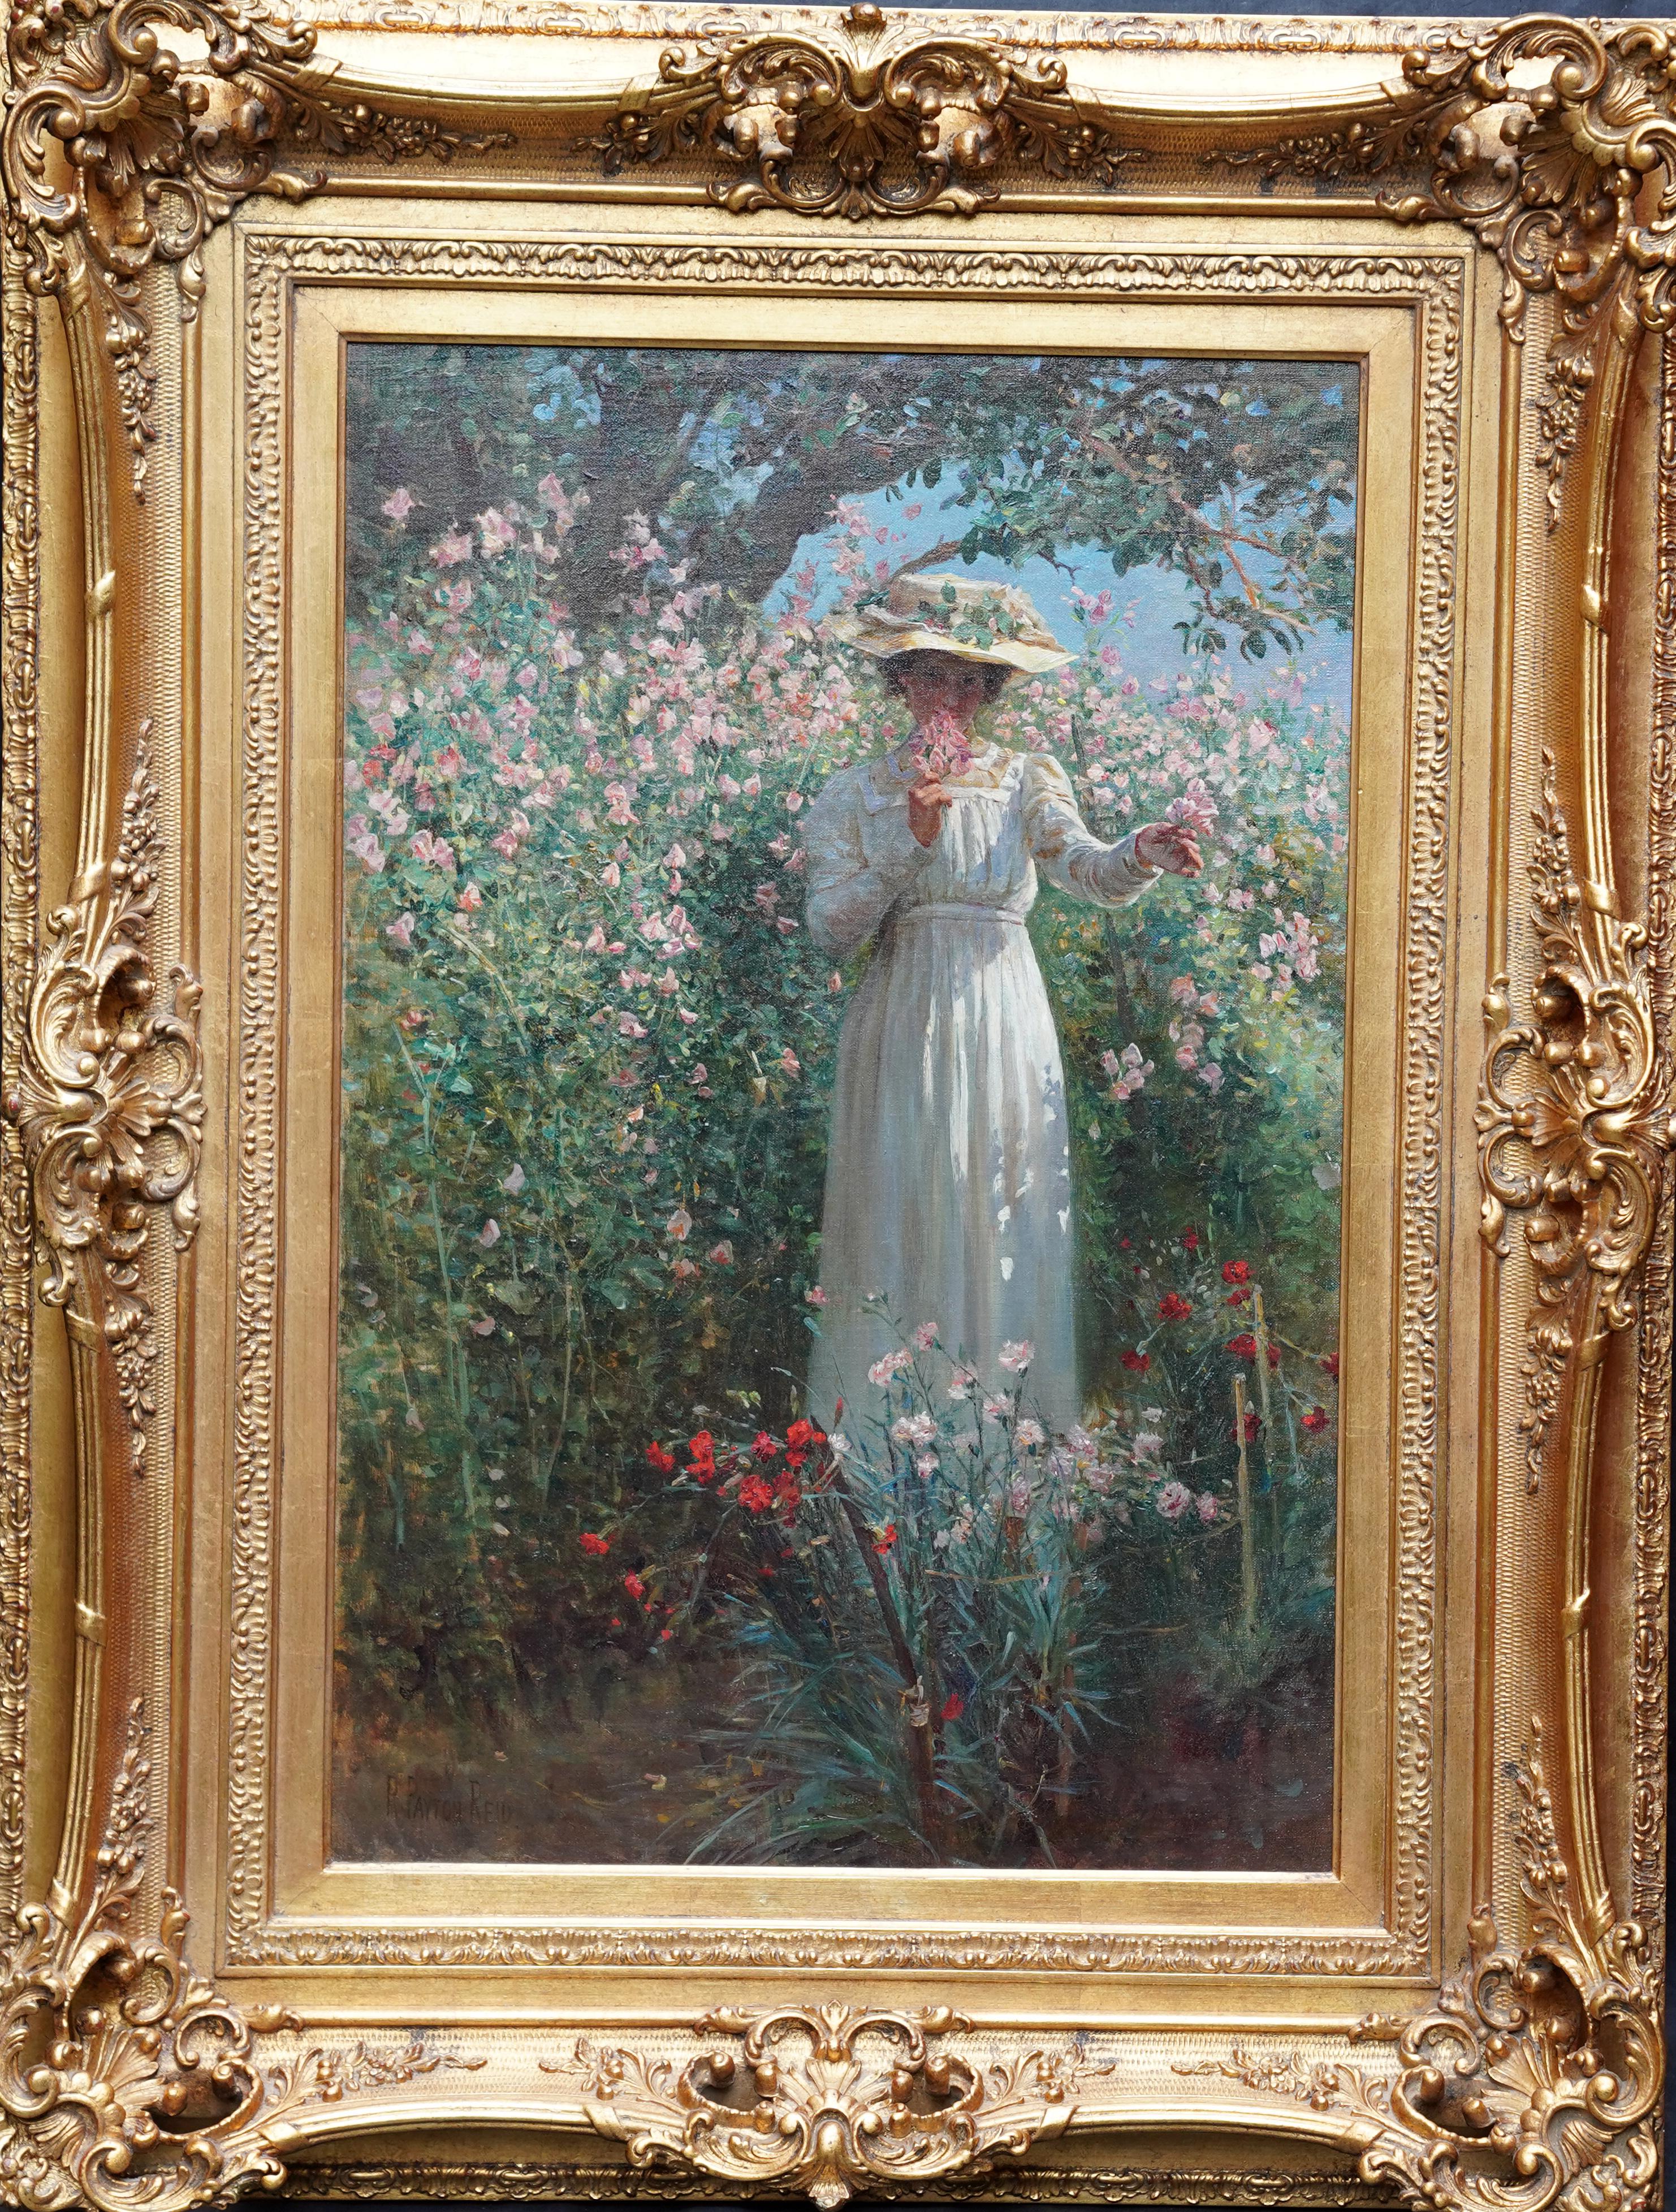 Portrait of a Lady with Sweet Peas - Scottish Edwardian exhib art oil painting 5